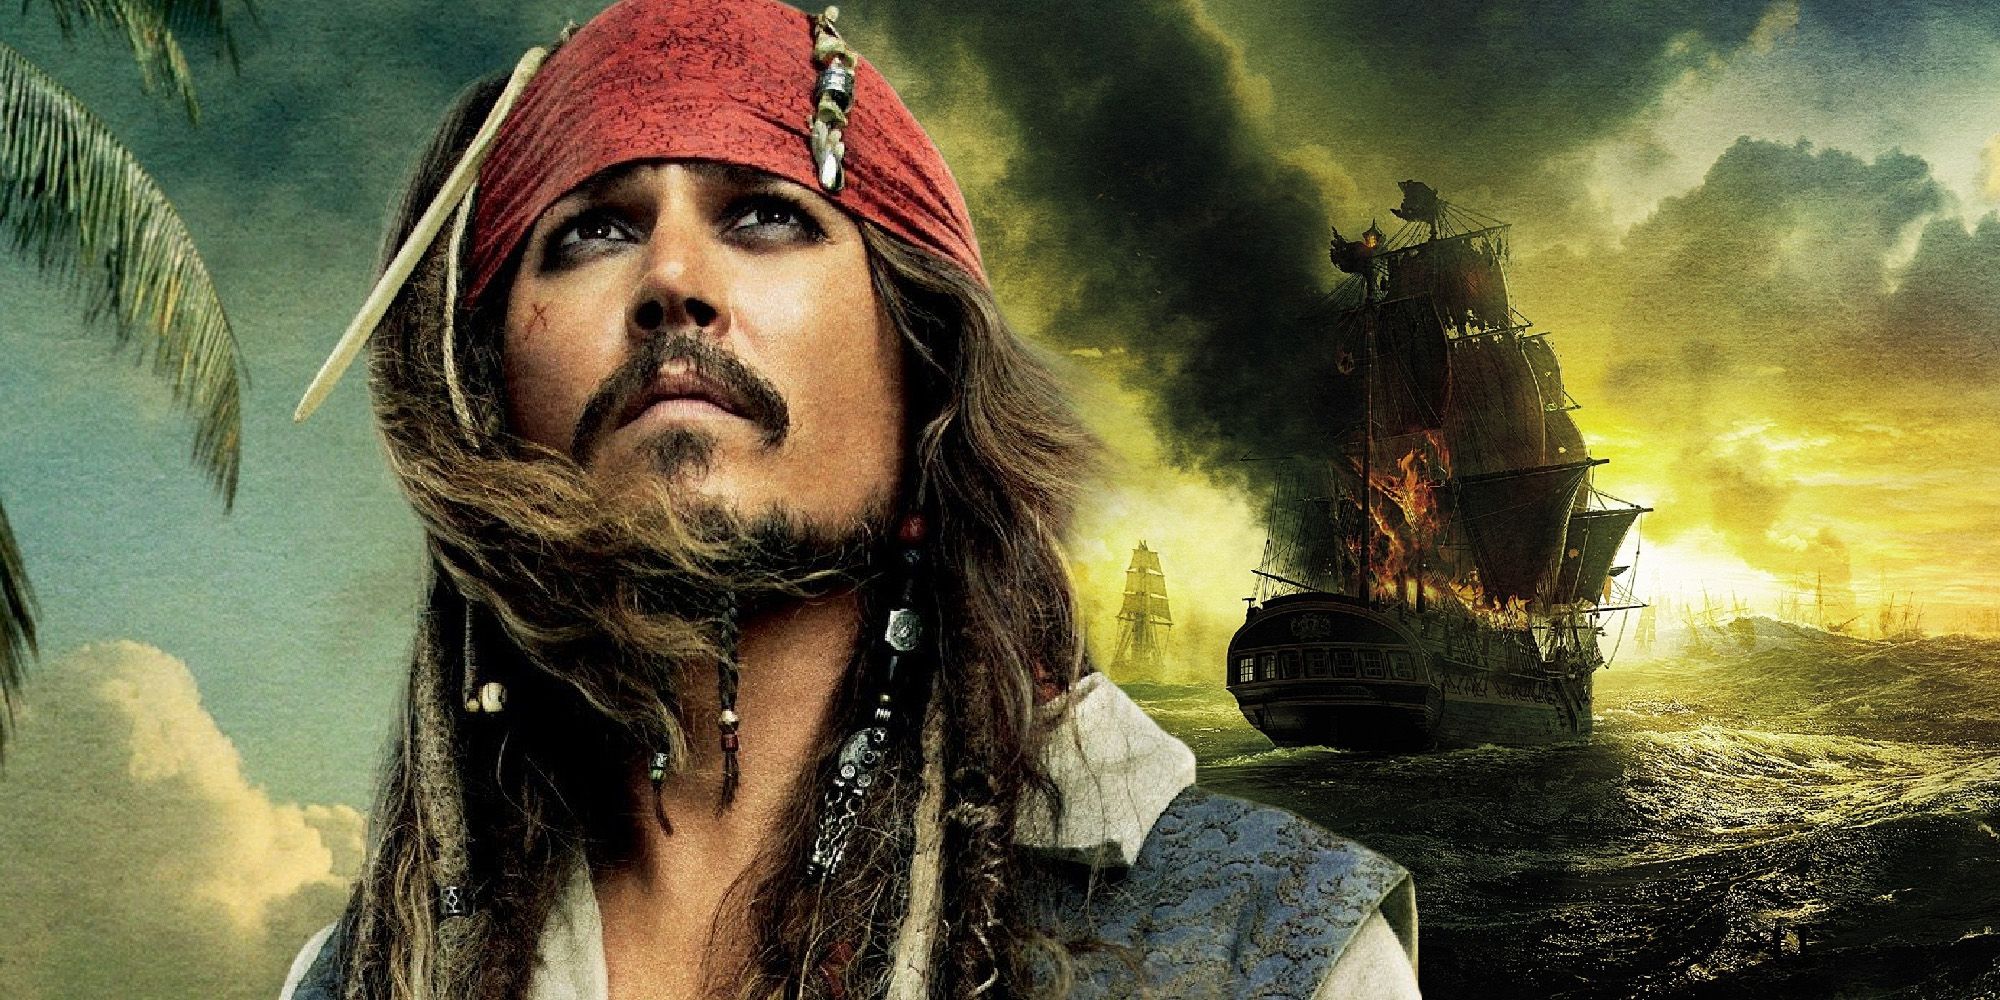 Pirates of the Caribbean Is Better Without Johnny Depp